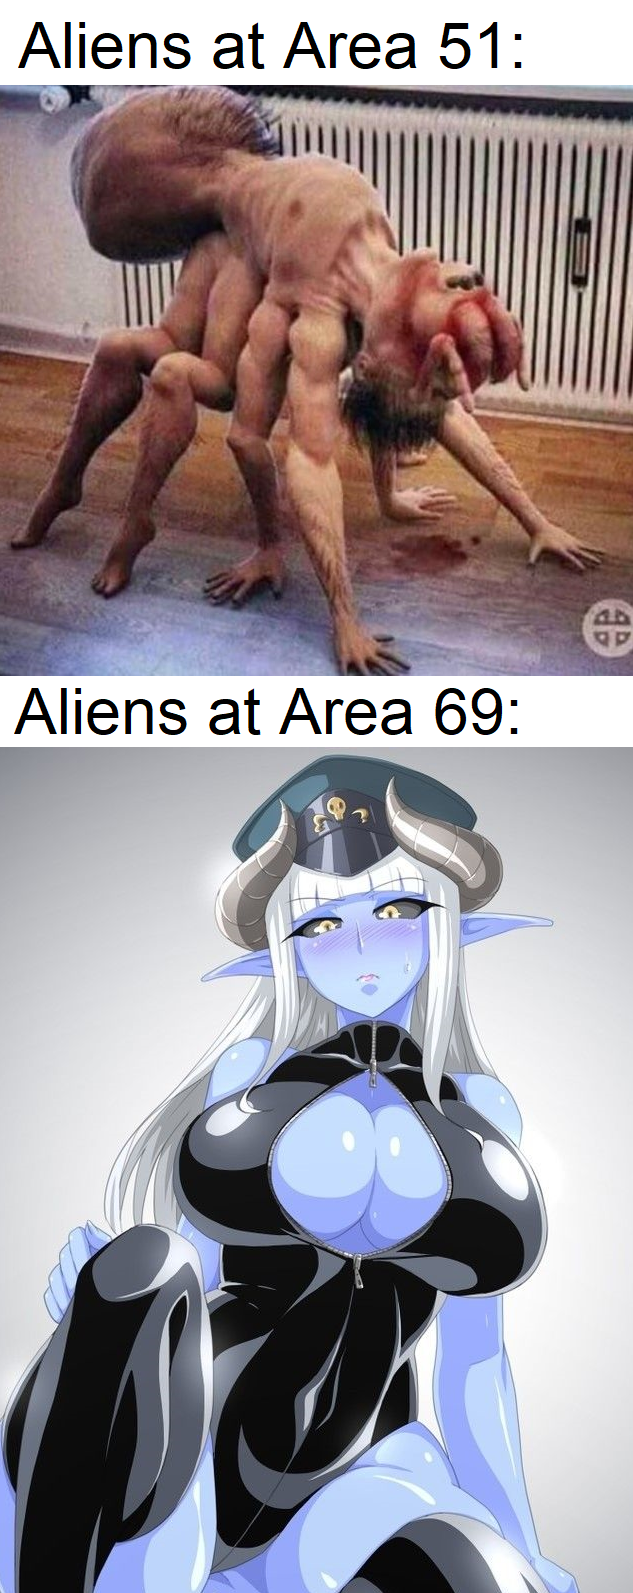 sorry don't know the sauce, just googled "alien anime waifu"